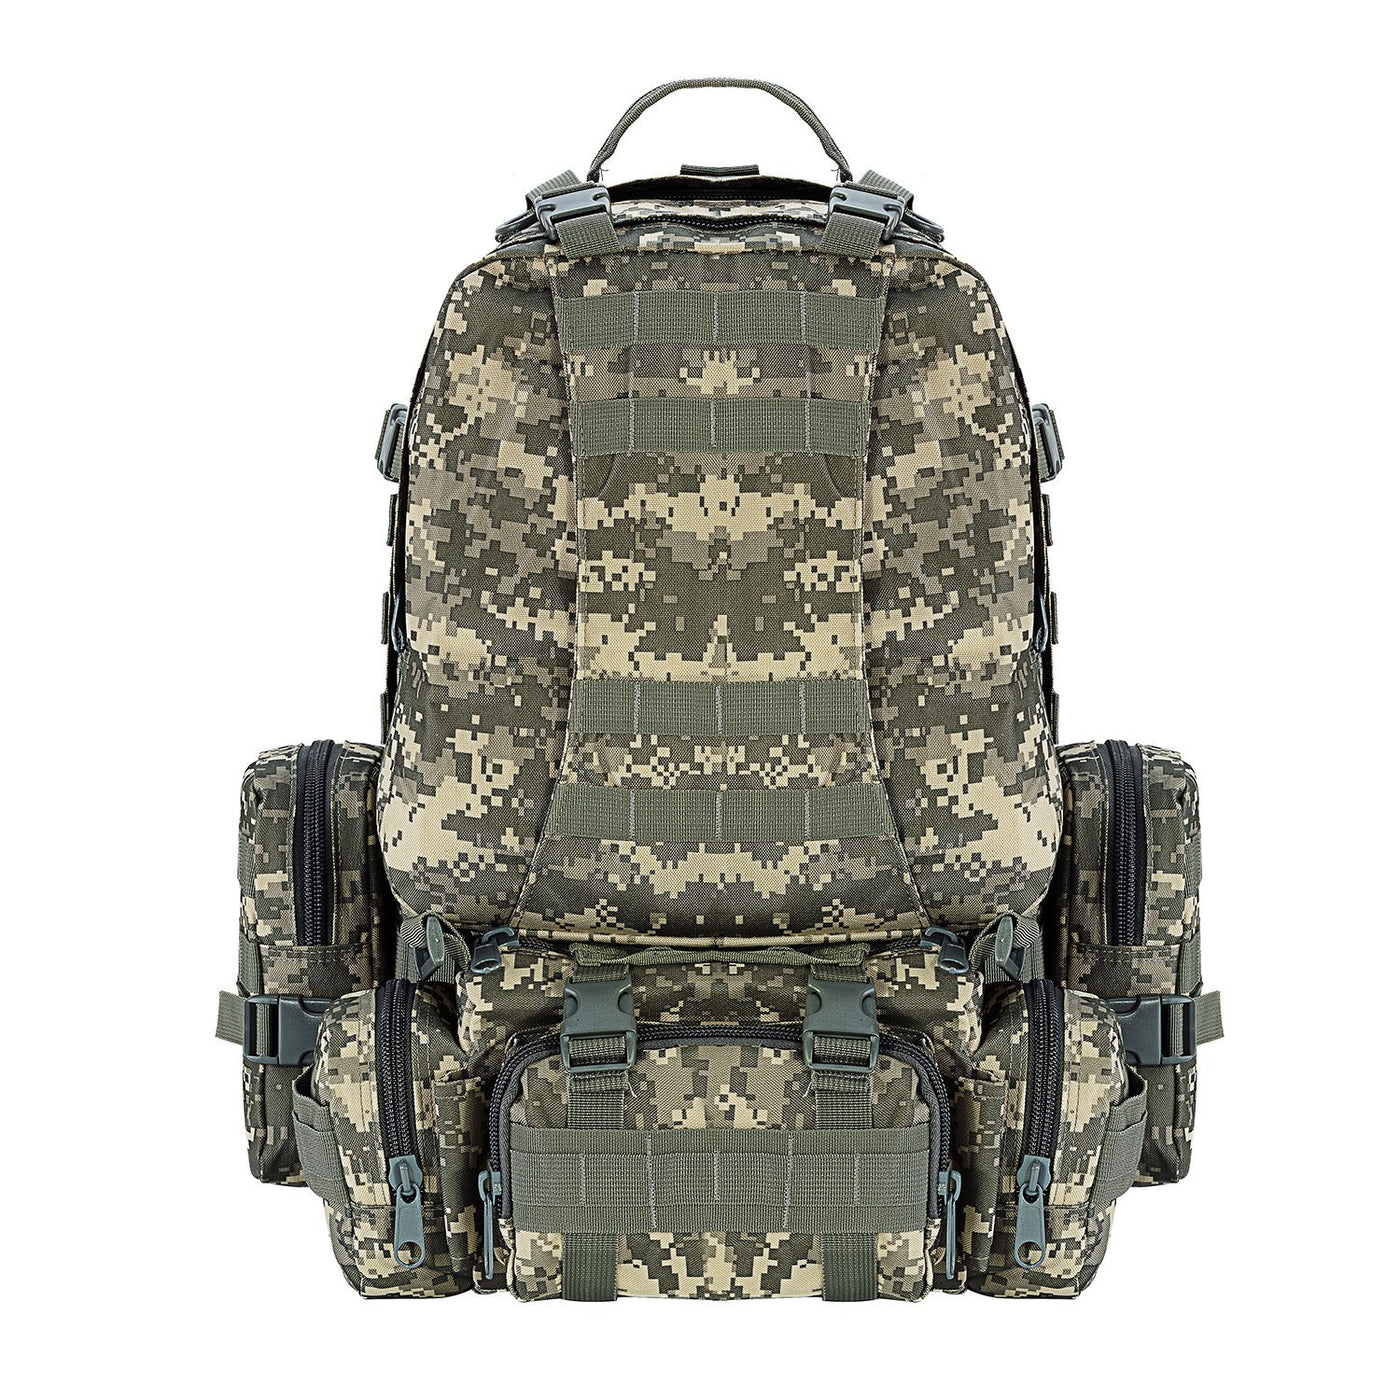 Tour of Duty Outdoor 72 Hour Backpack 60L Military Tactical Backpack